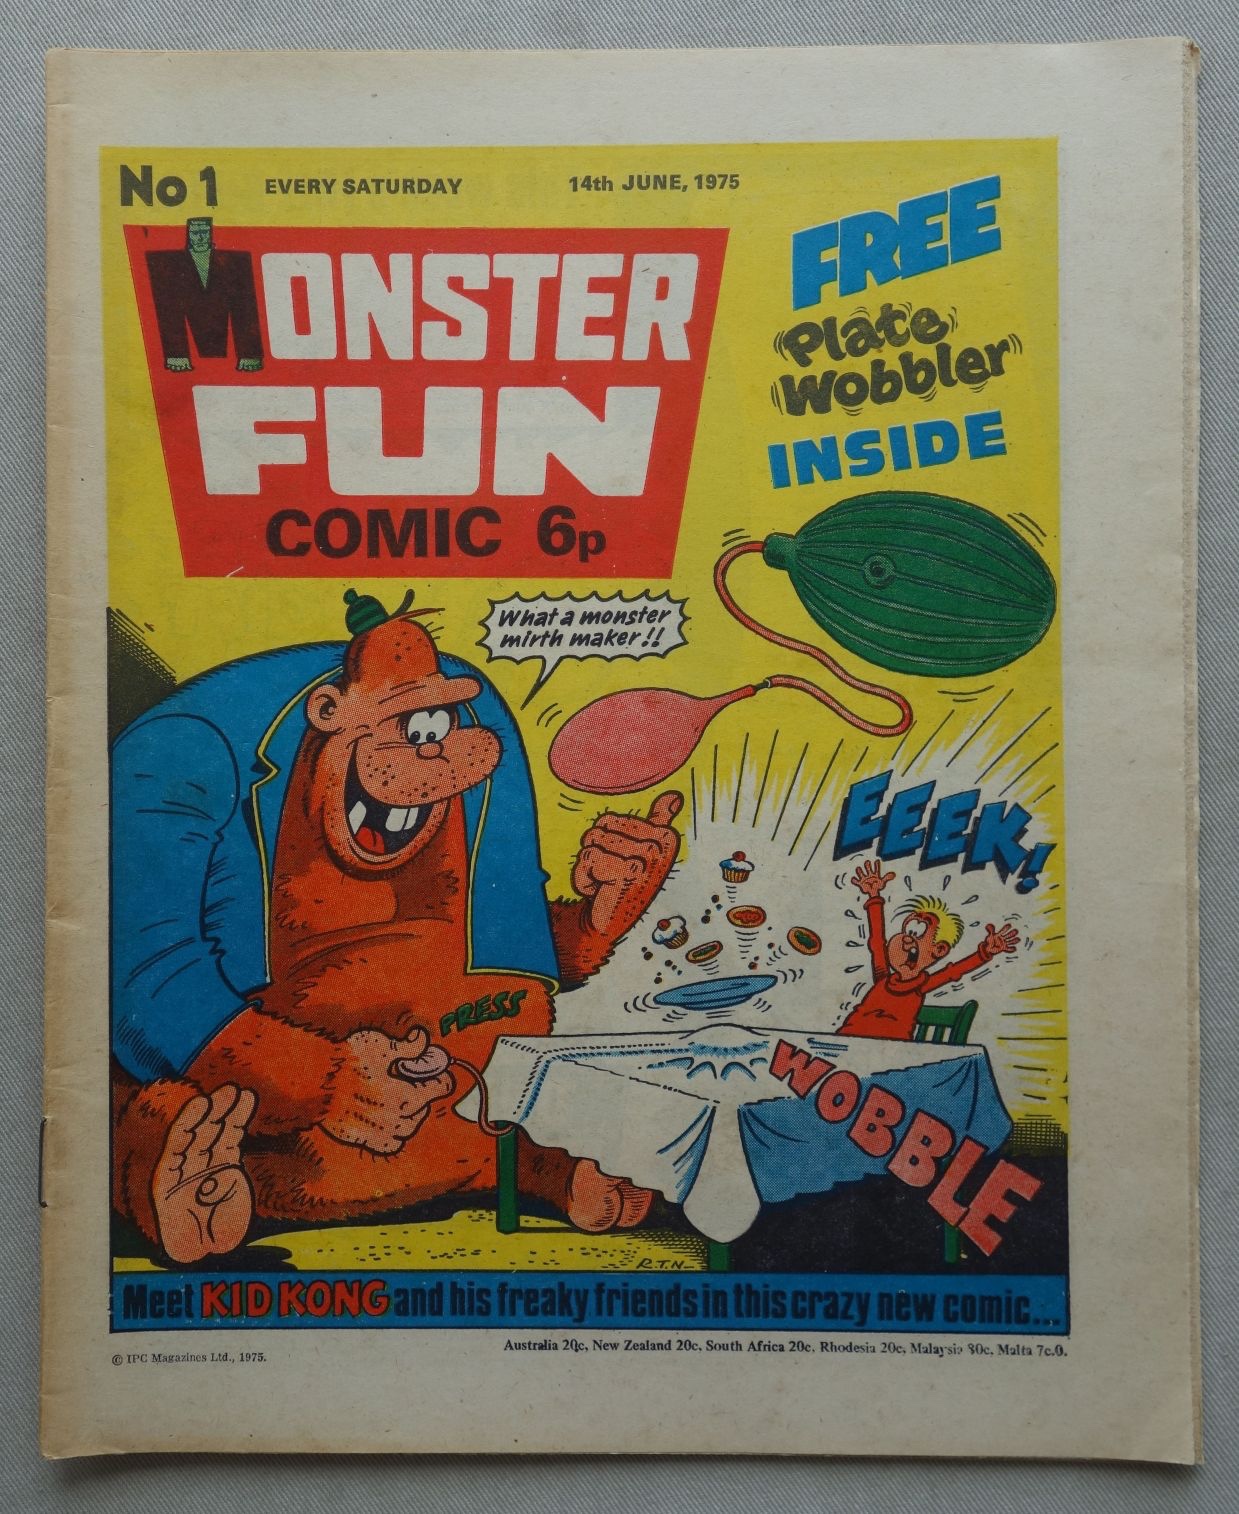 Monster Fun comic #1 - cover dated 14th June 1975